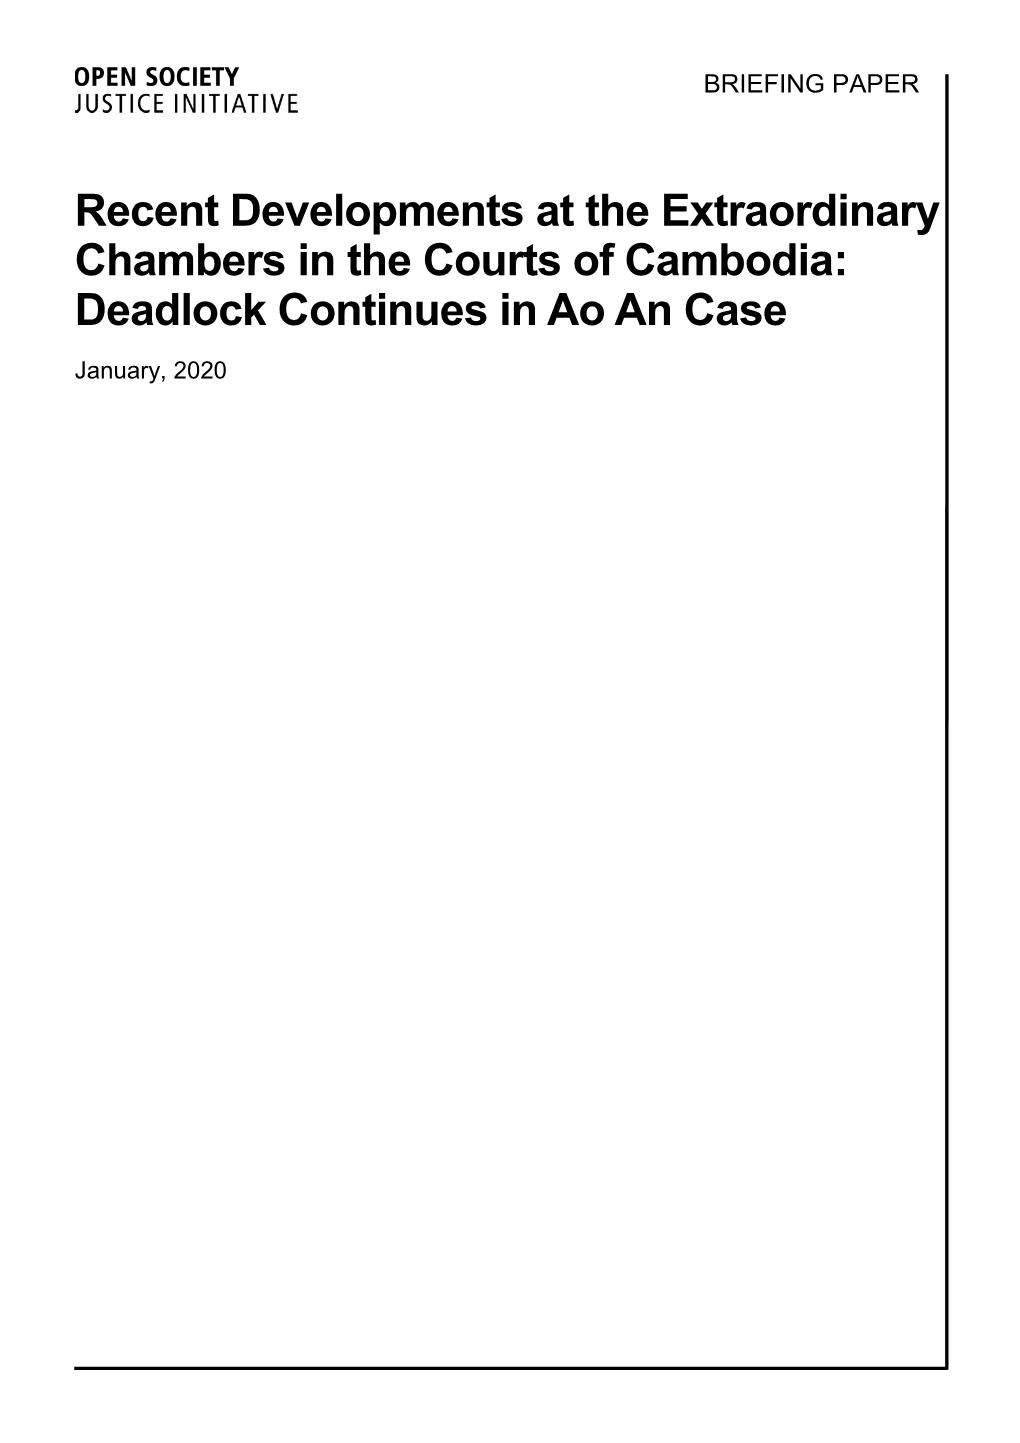 Recent Developments at the Extraordinary Chambers in the Courts of Cambodia: Deadlock Continues in Ao an Case